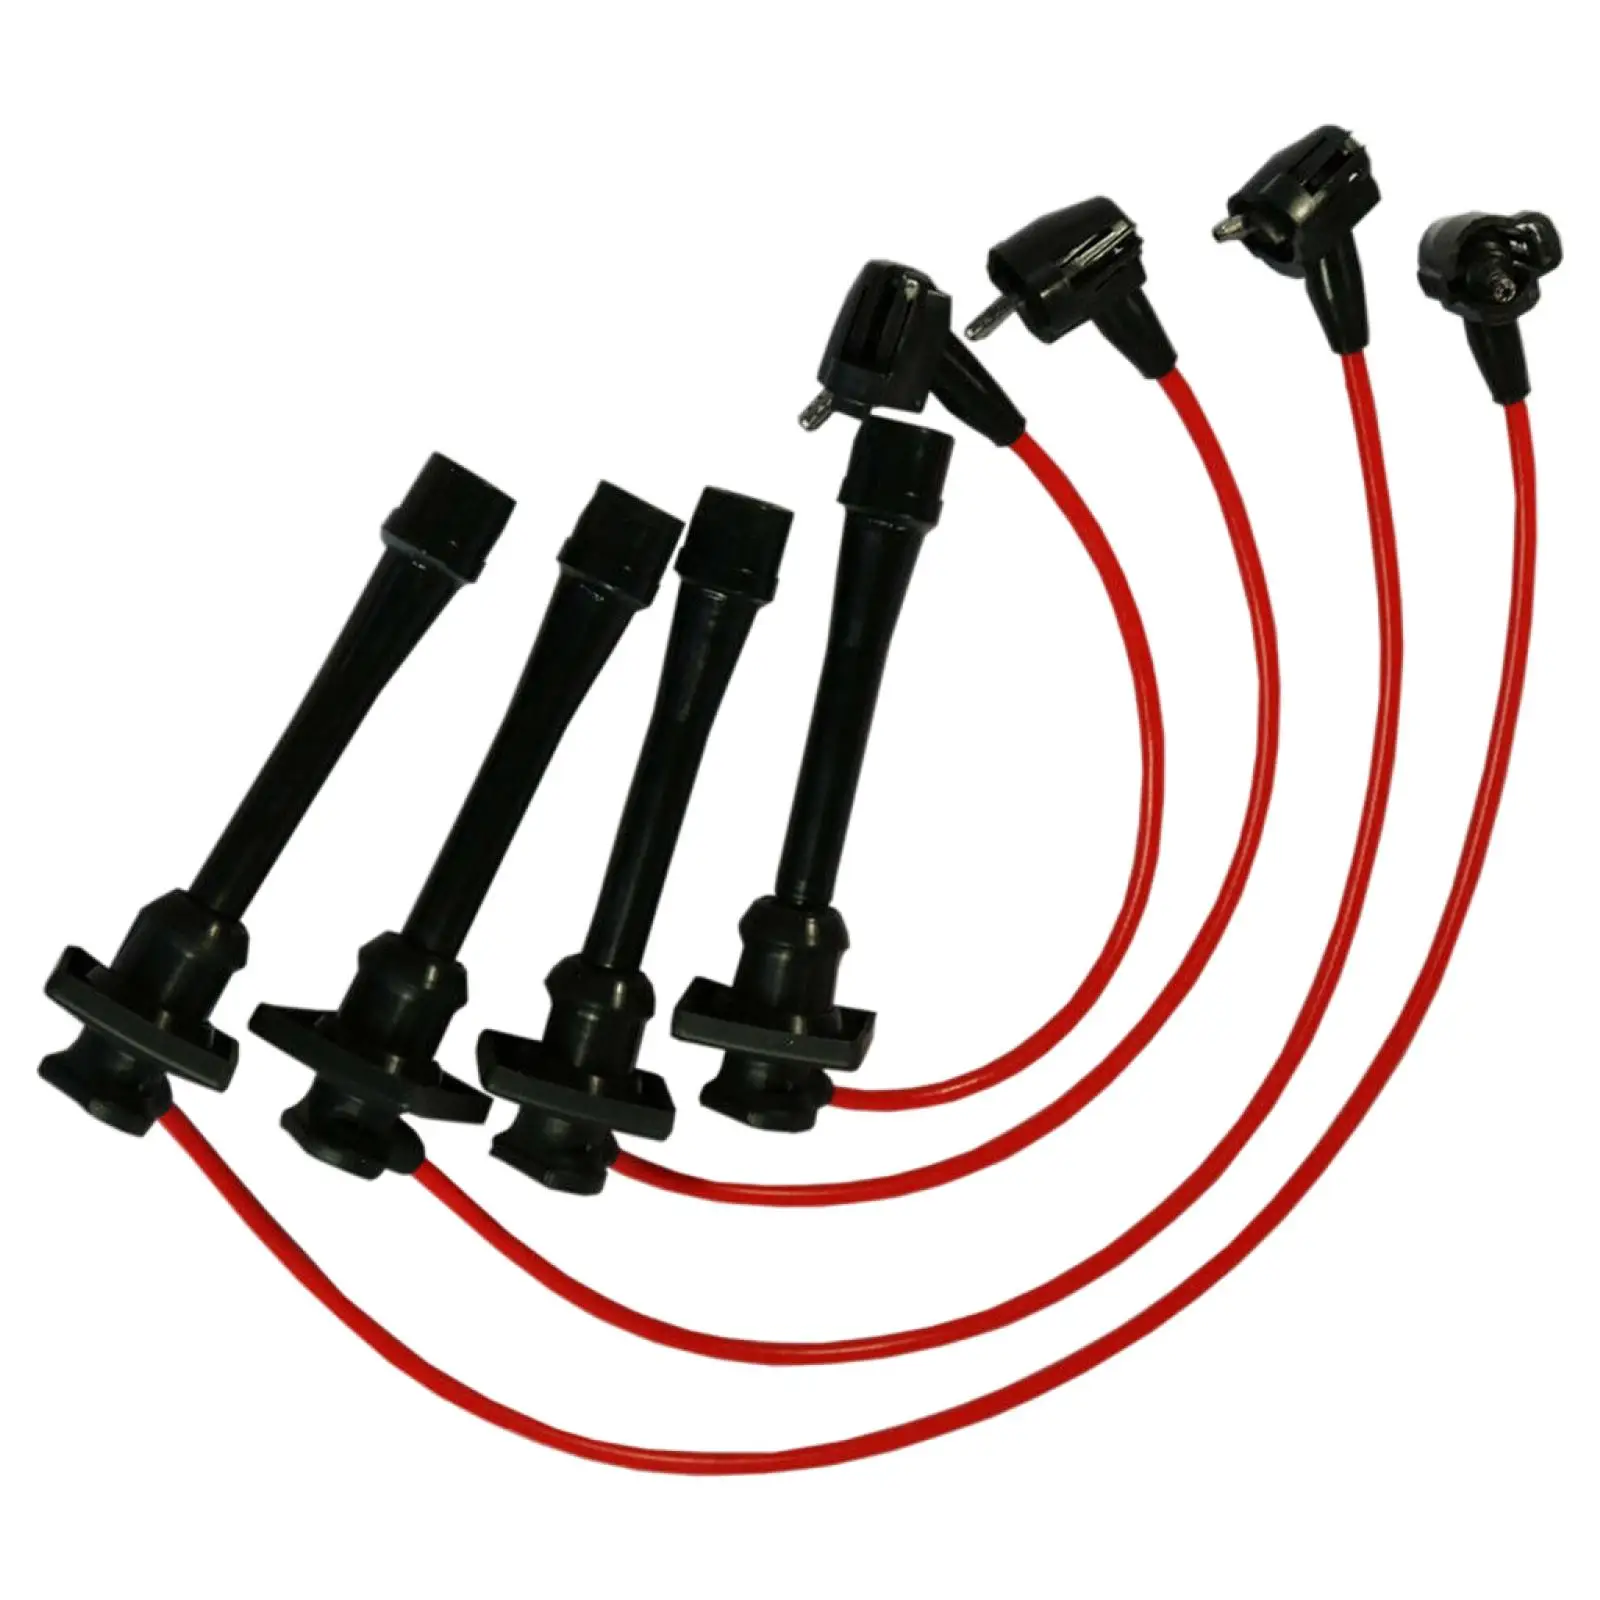 4x Spark Plug Wires Silicone Outer for   1.6L 1.8L 1993-1997